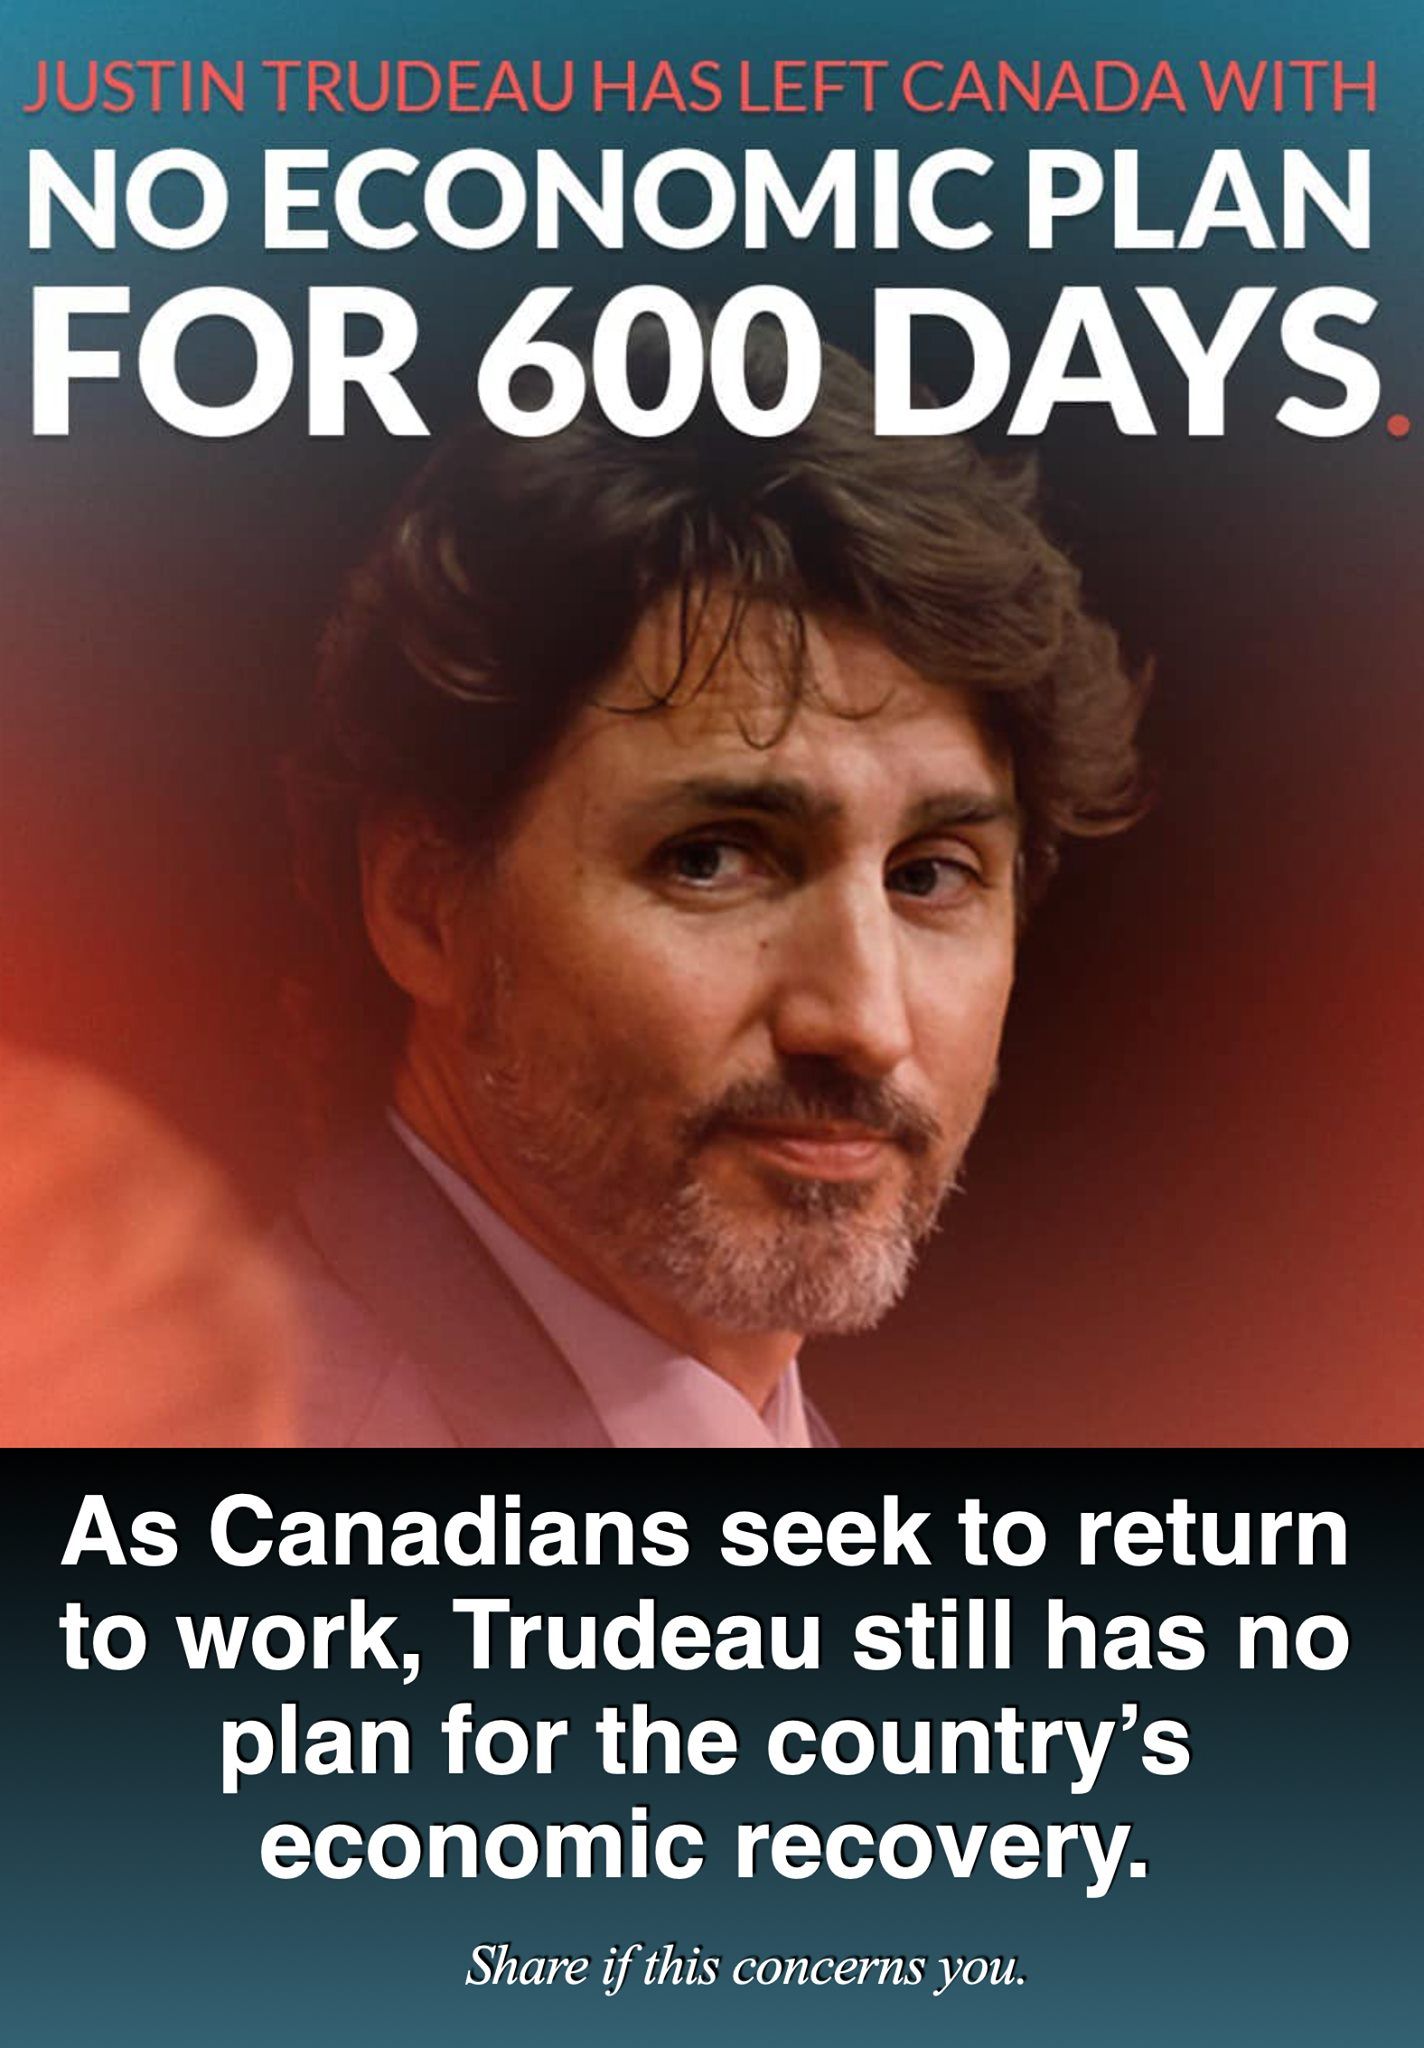 Justin Trudeau left Canada with No Economic Plan for 600 Days